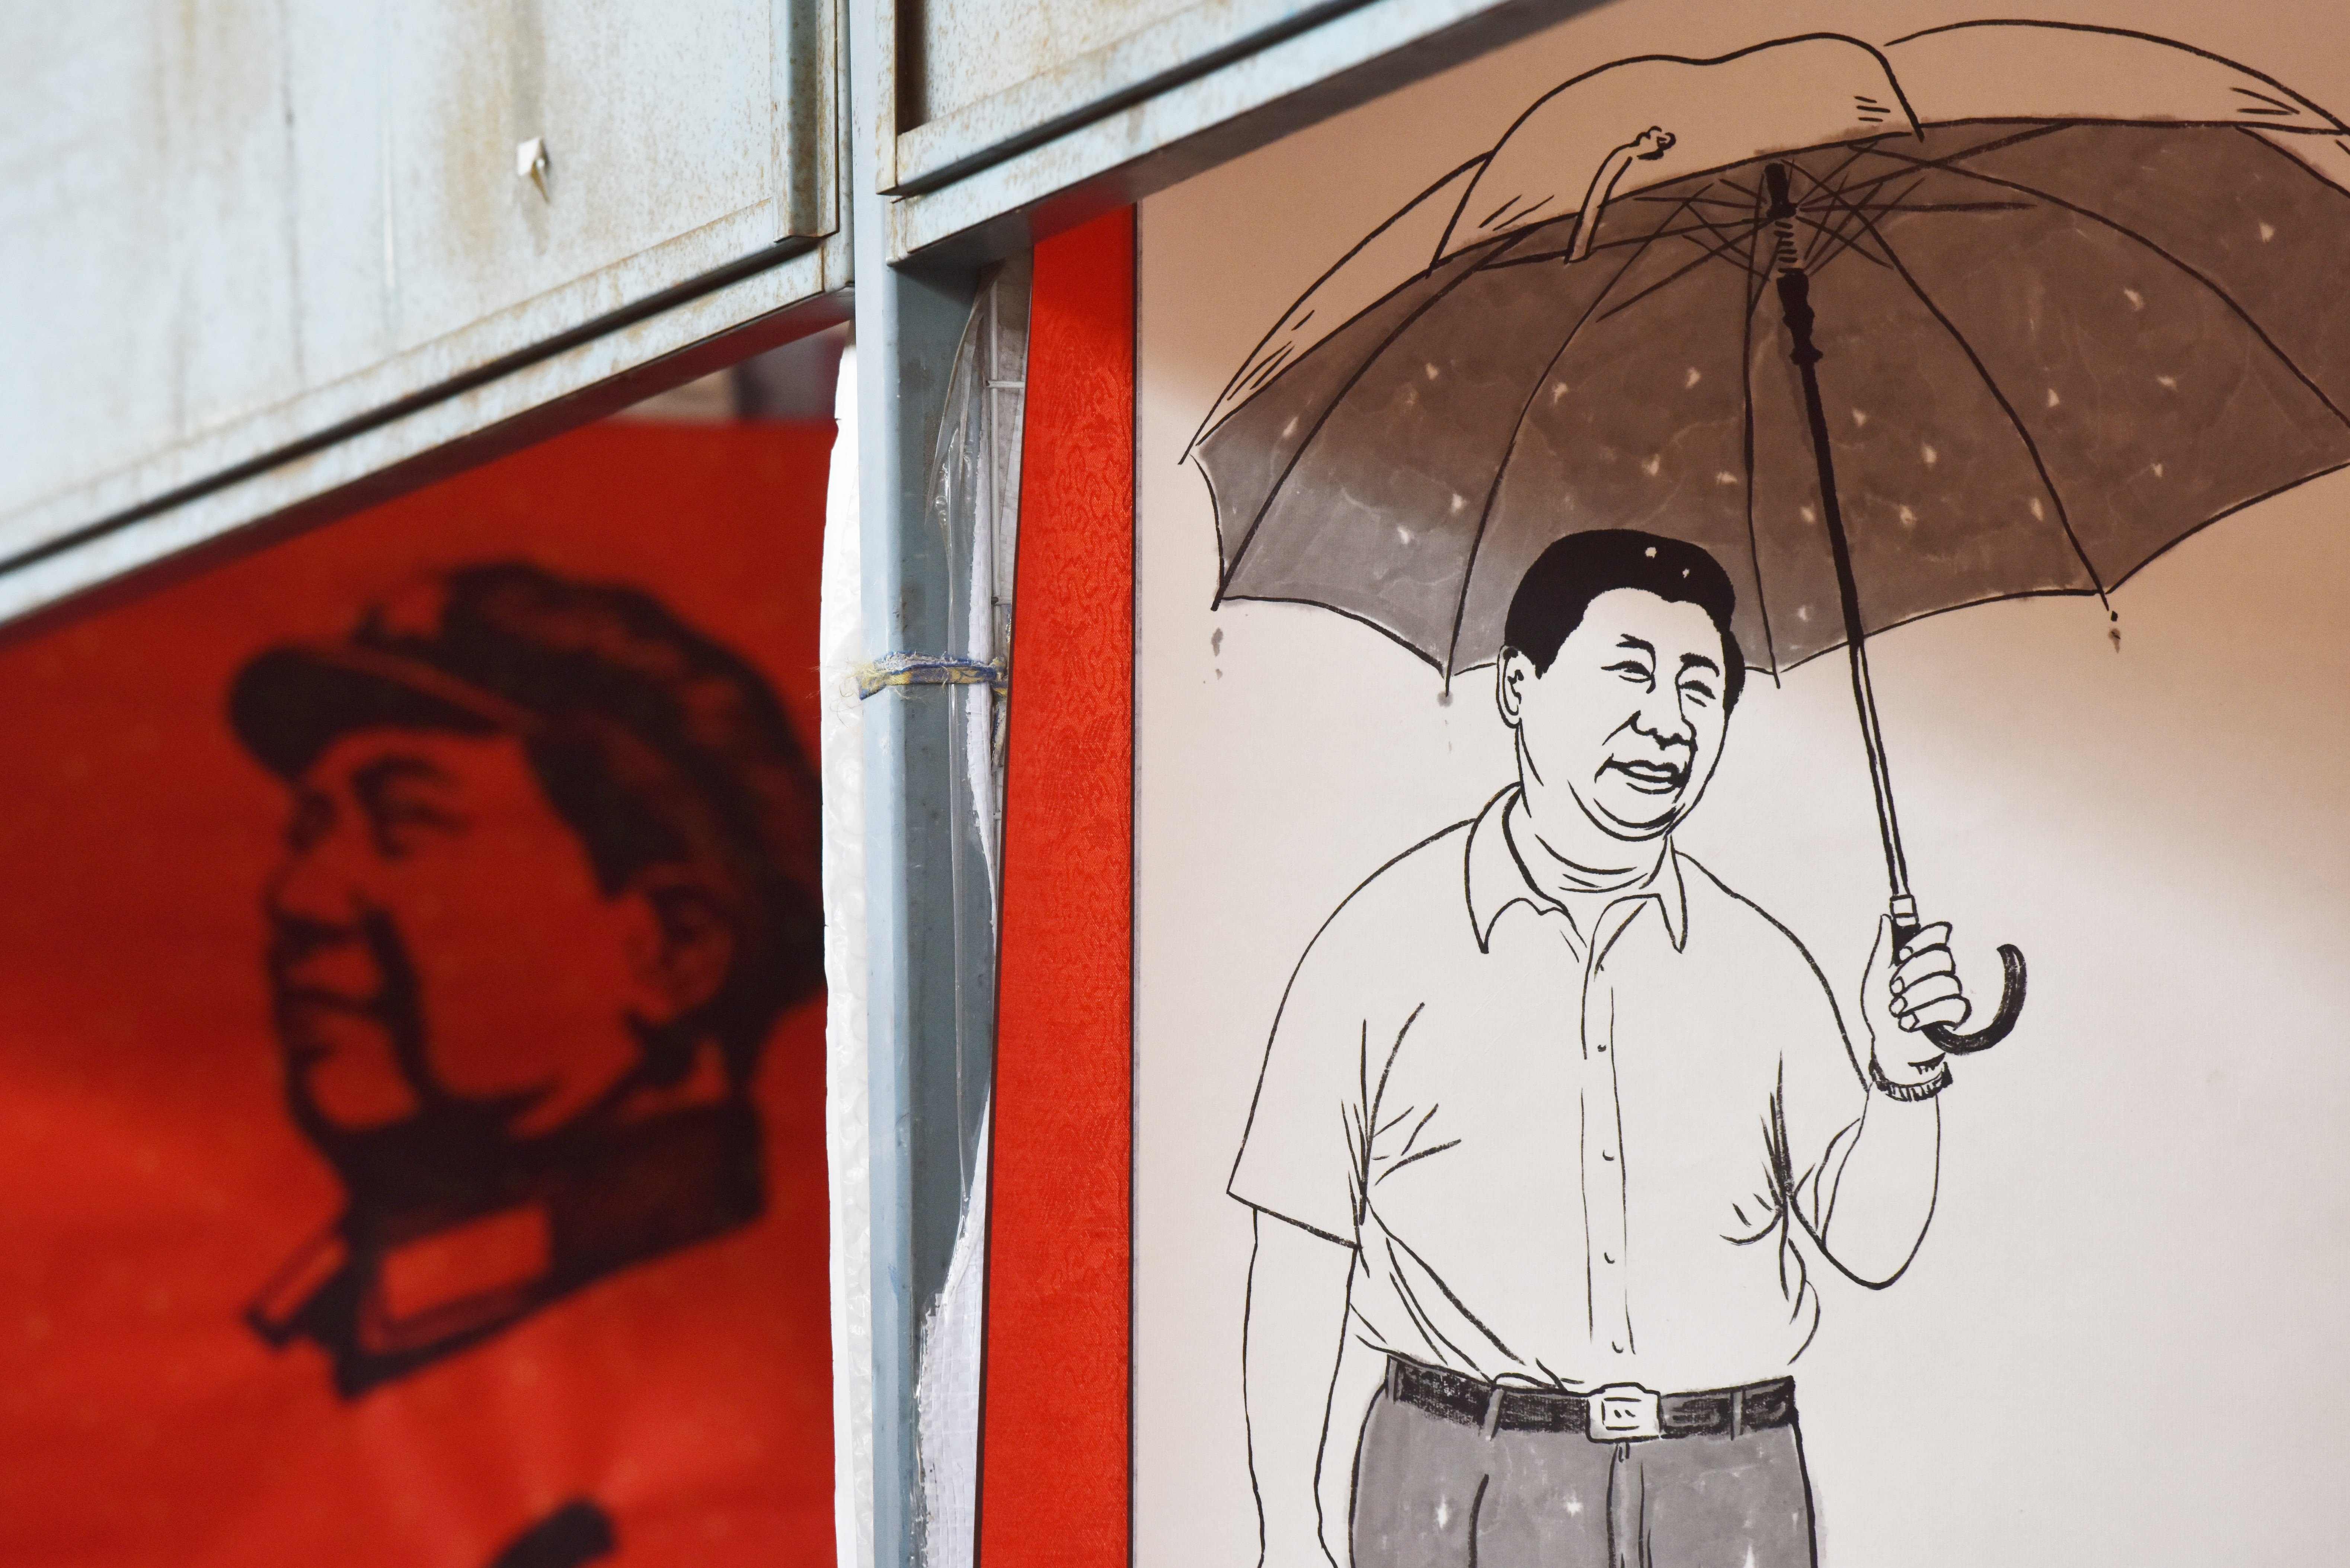 Mao Zedong (left) ruled the Communist Party for 33 years. How long will Xi Jinping stay in power?